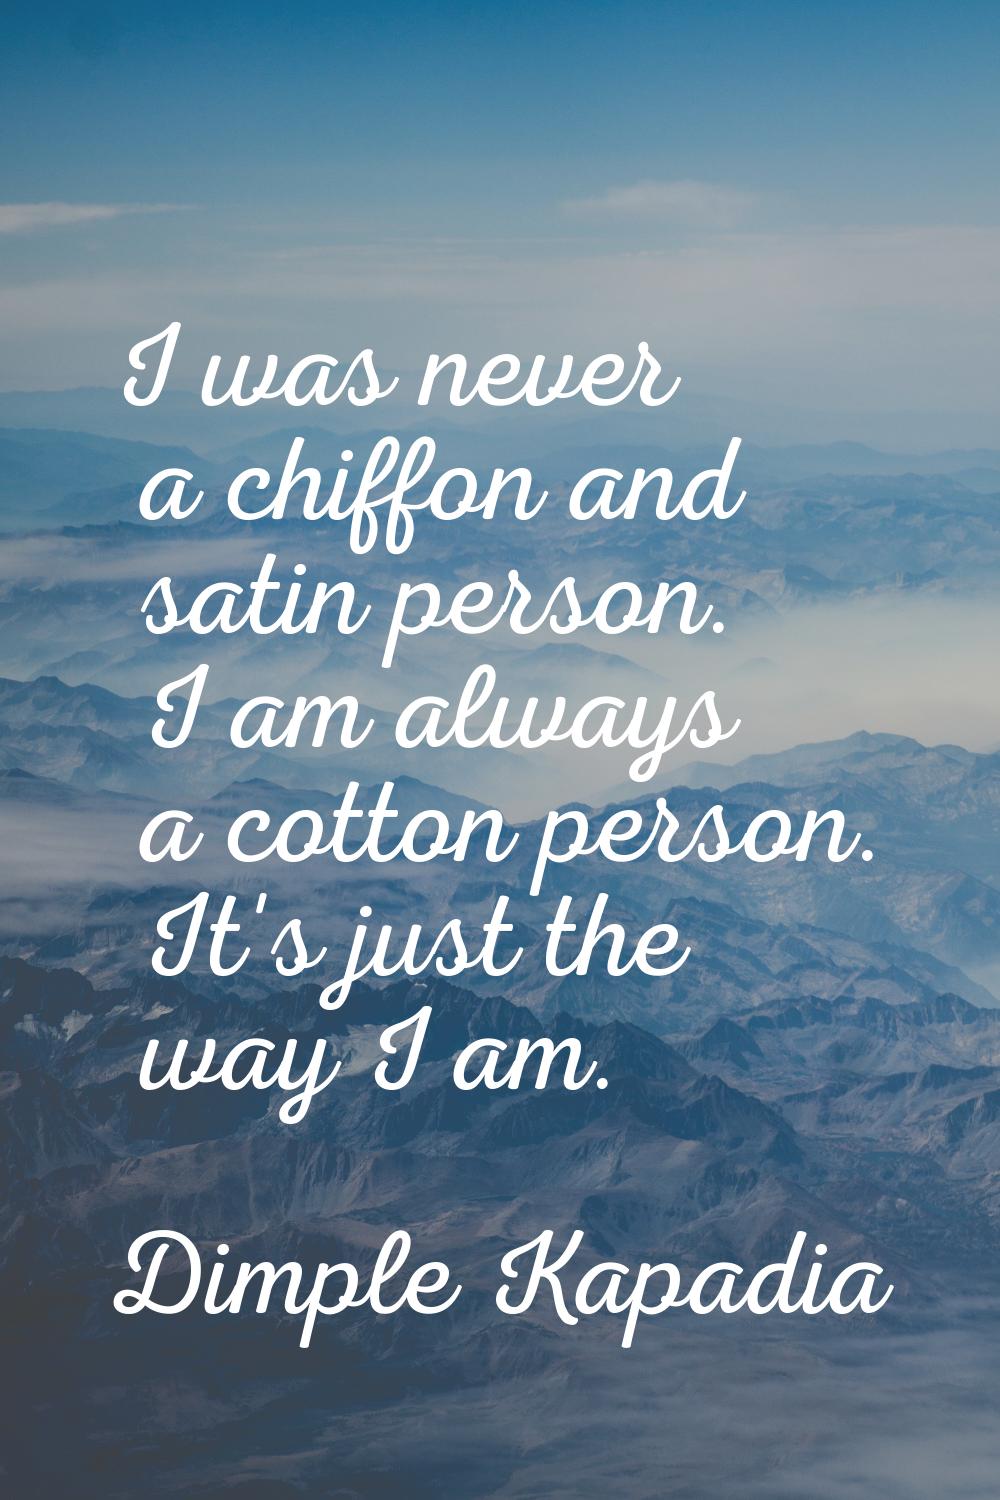 I was never a chiffon and satin person. I am always a cotton person. It's just the way I am.